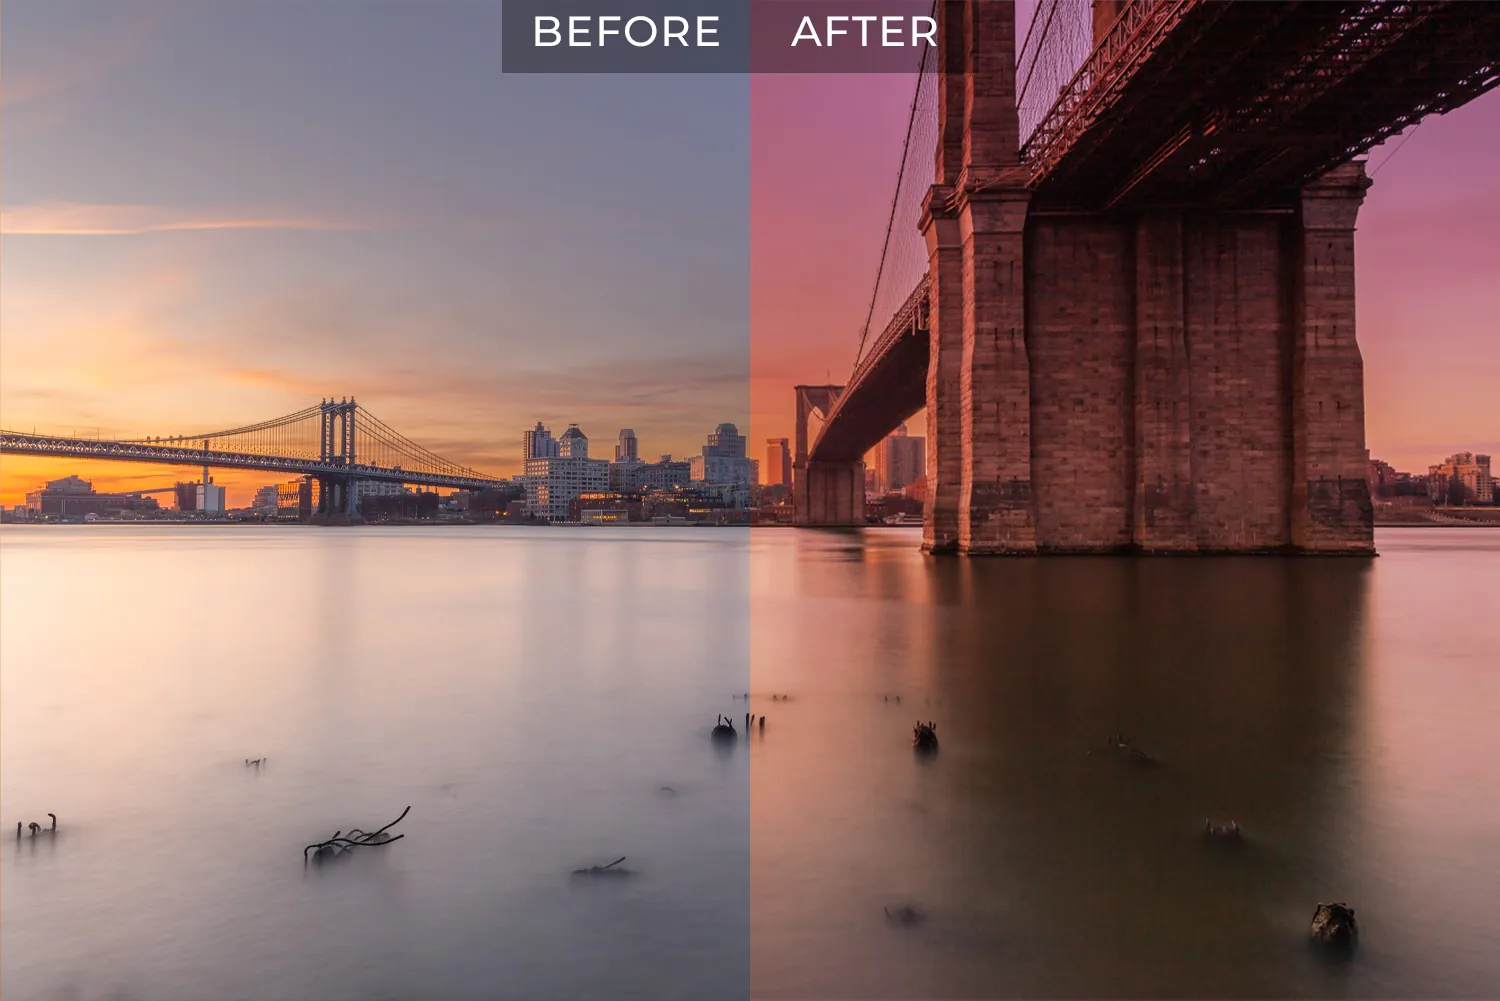 How to Achieve Smooth Color Transitions with the Gradient Tool